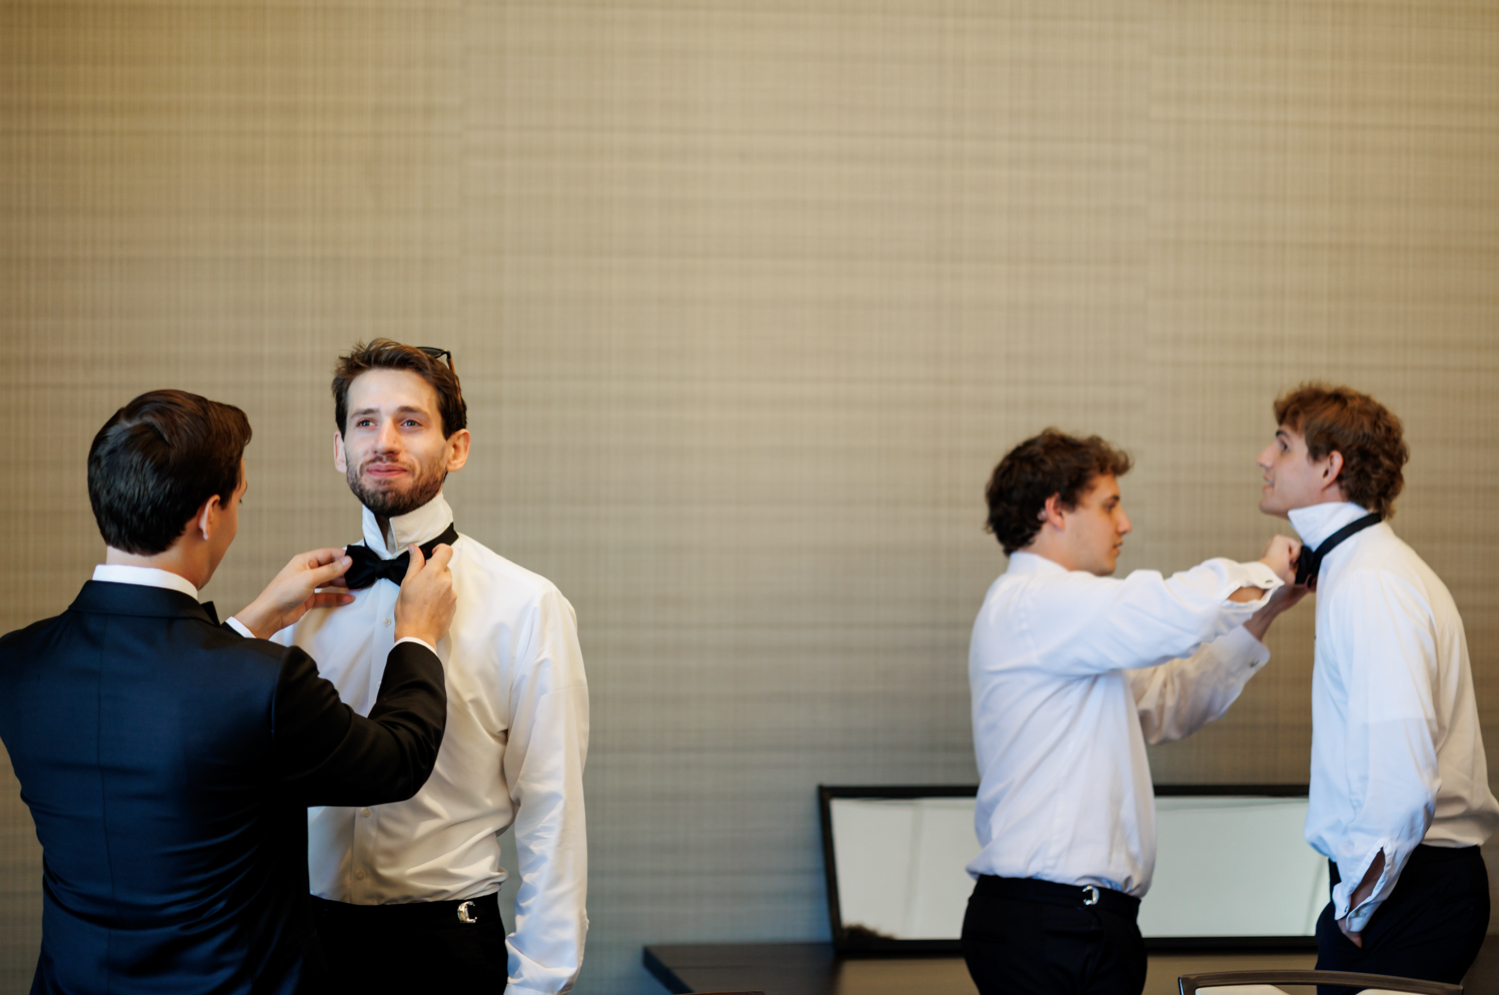 Groomsmen help each other with their bowties in the getting ready suite.